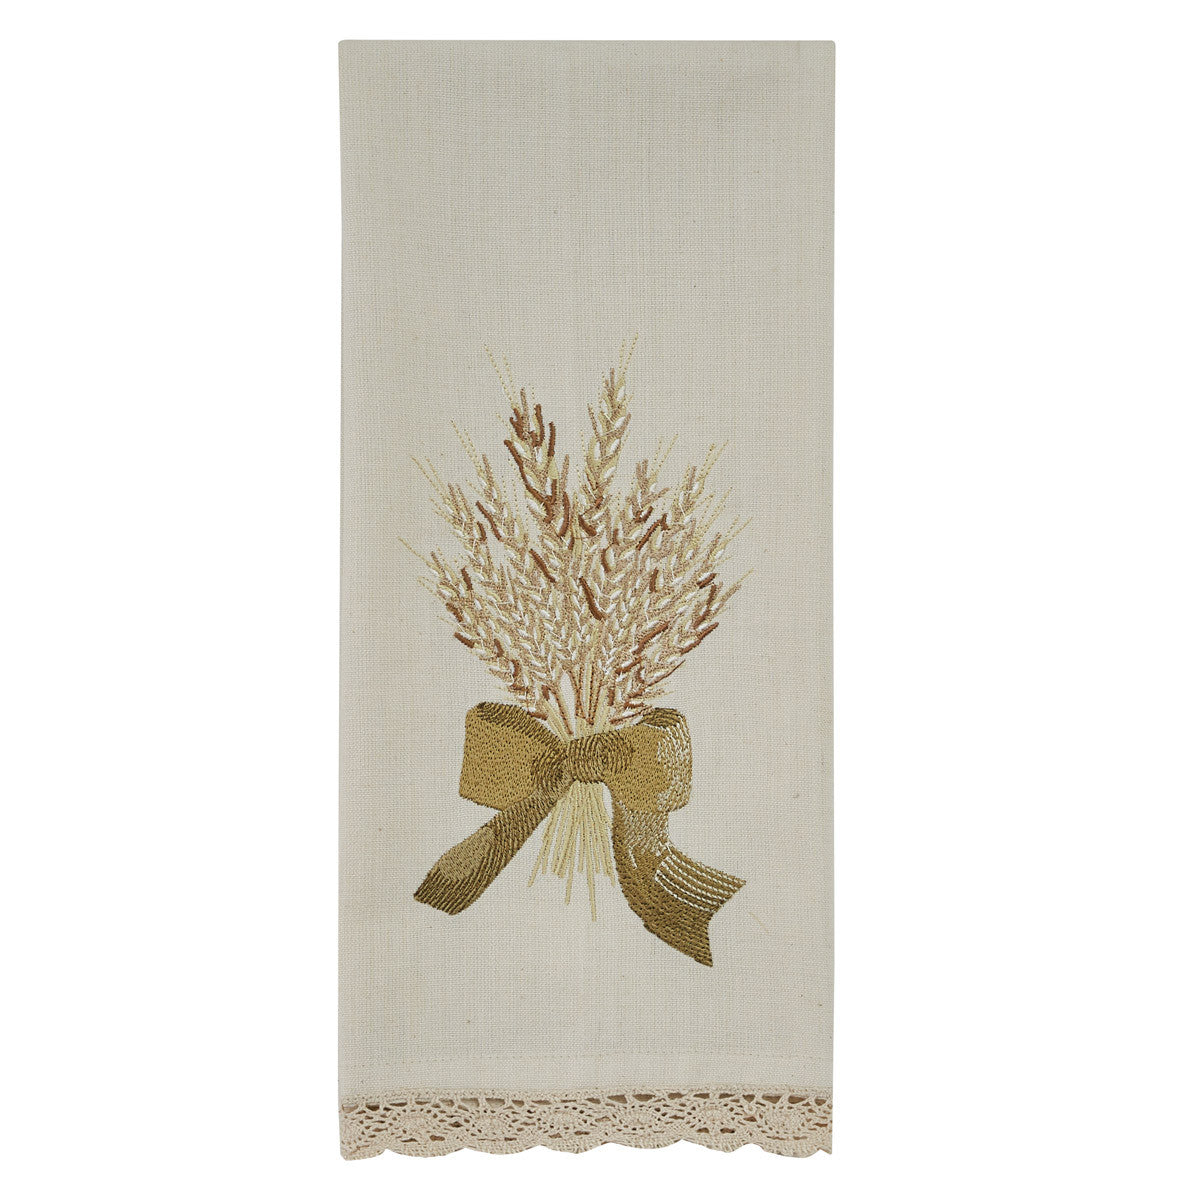 WHEAT WITH BOW EMBROIDERED DISHTOWEL